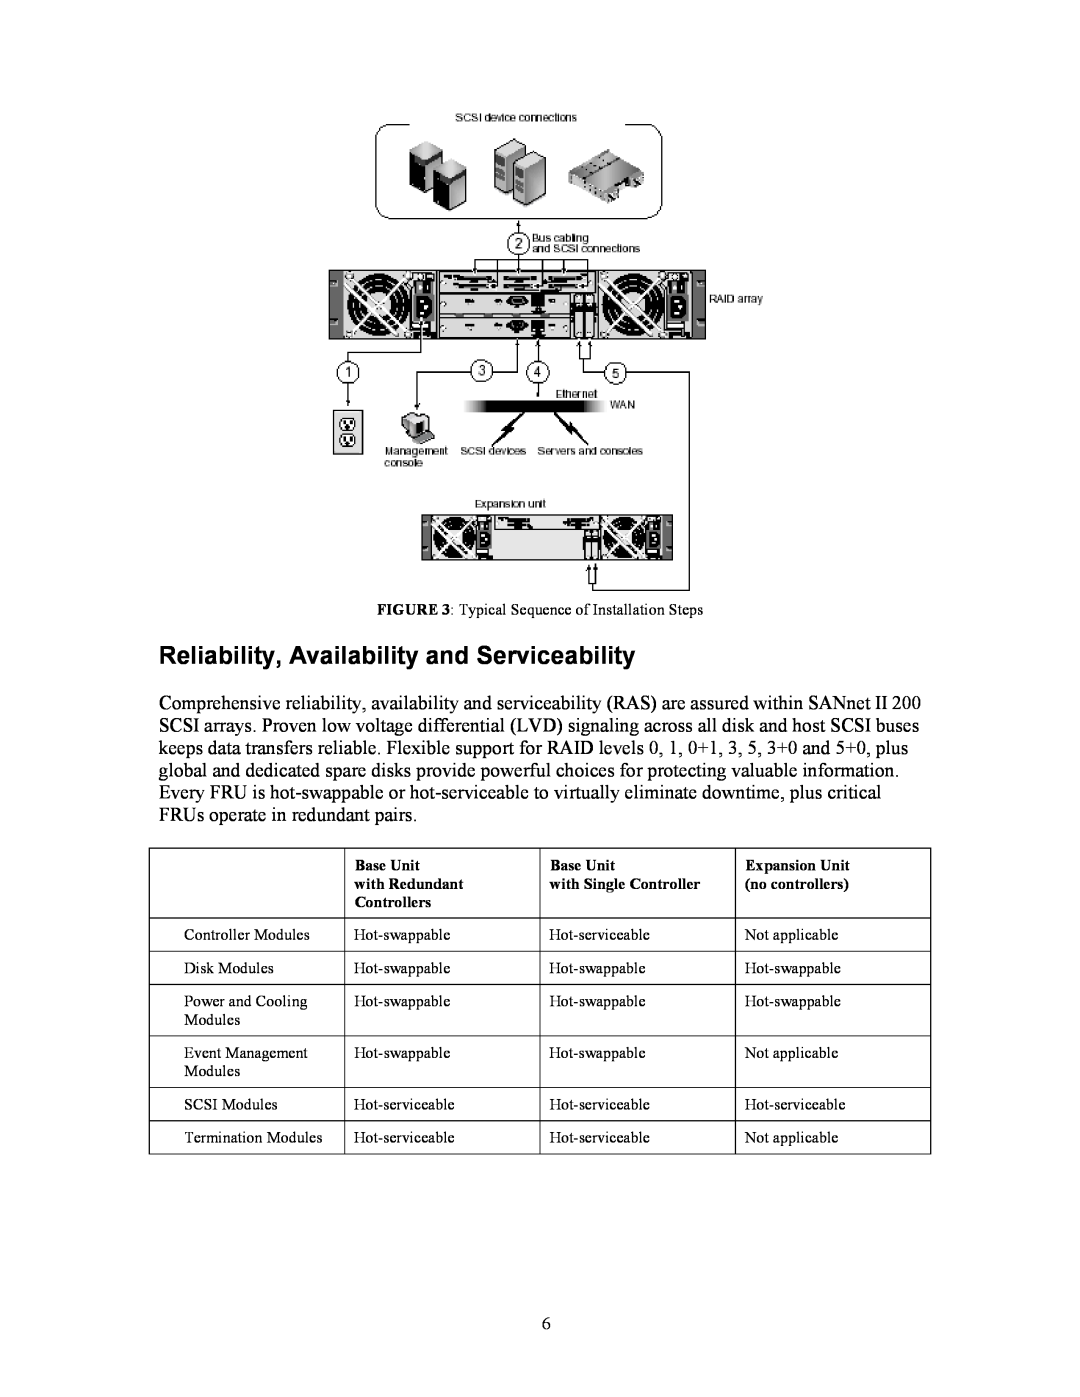 Dot Hill Systems 200 manual Reliability, Availability and Serviceability 